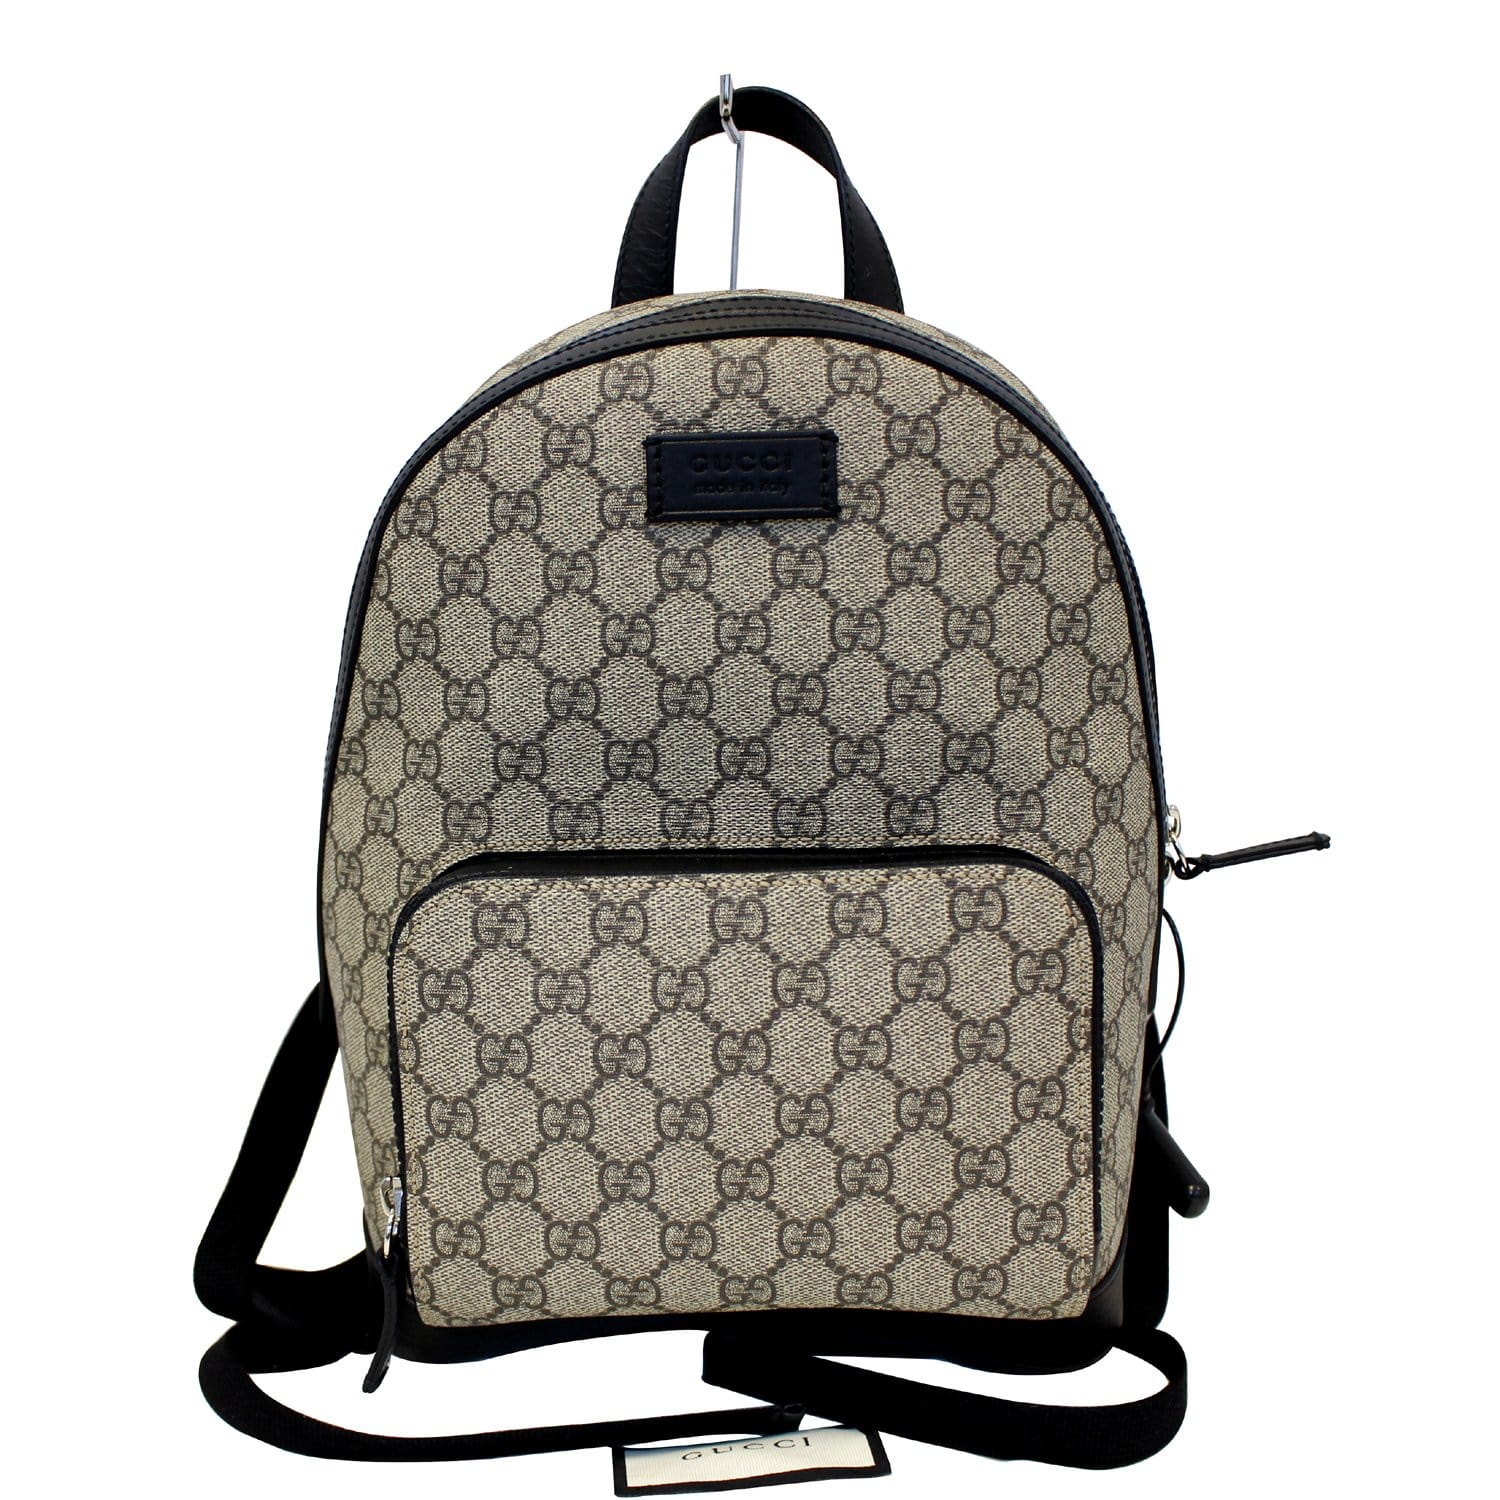 New Gucci Authentic “Fake Not” Collection GG Supreme Large Backpack Limited